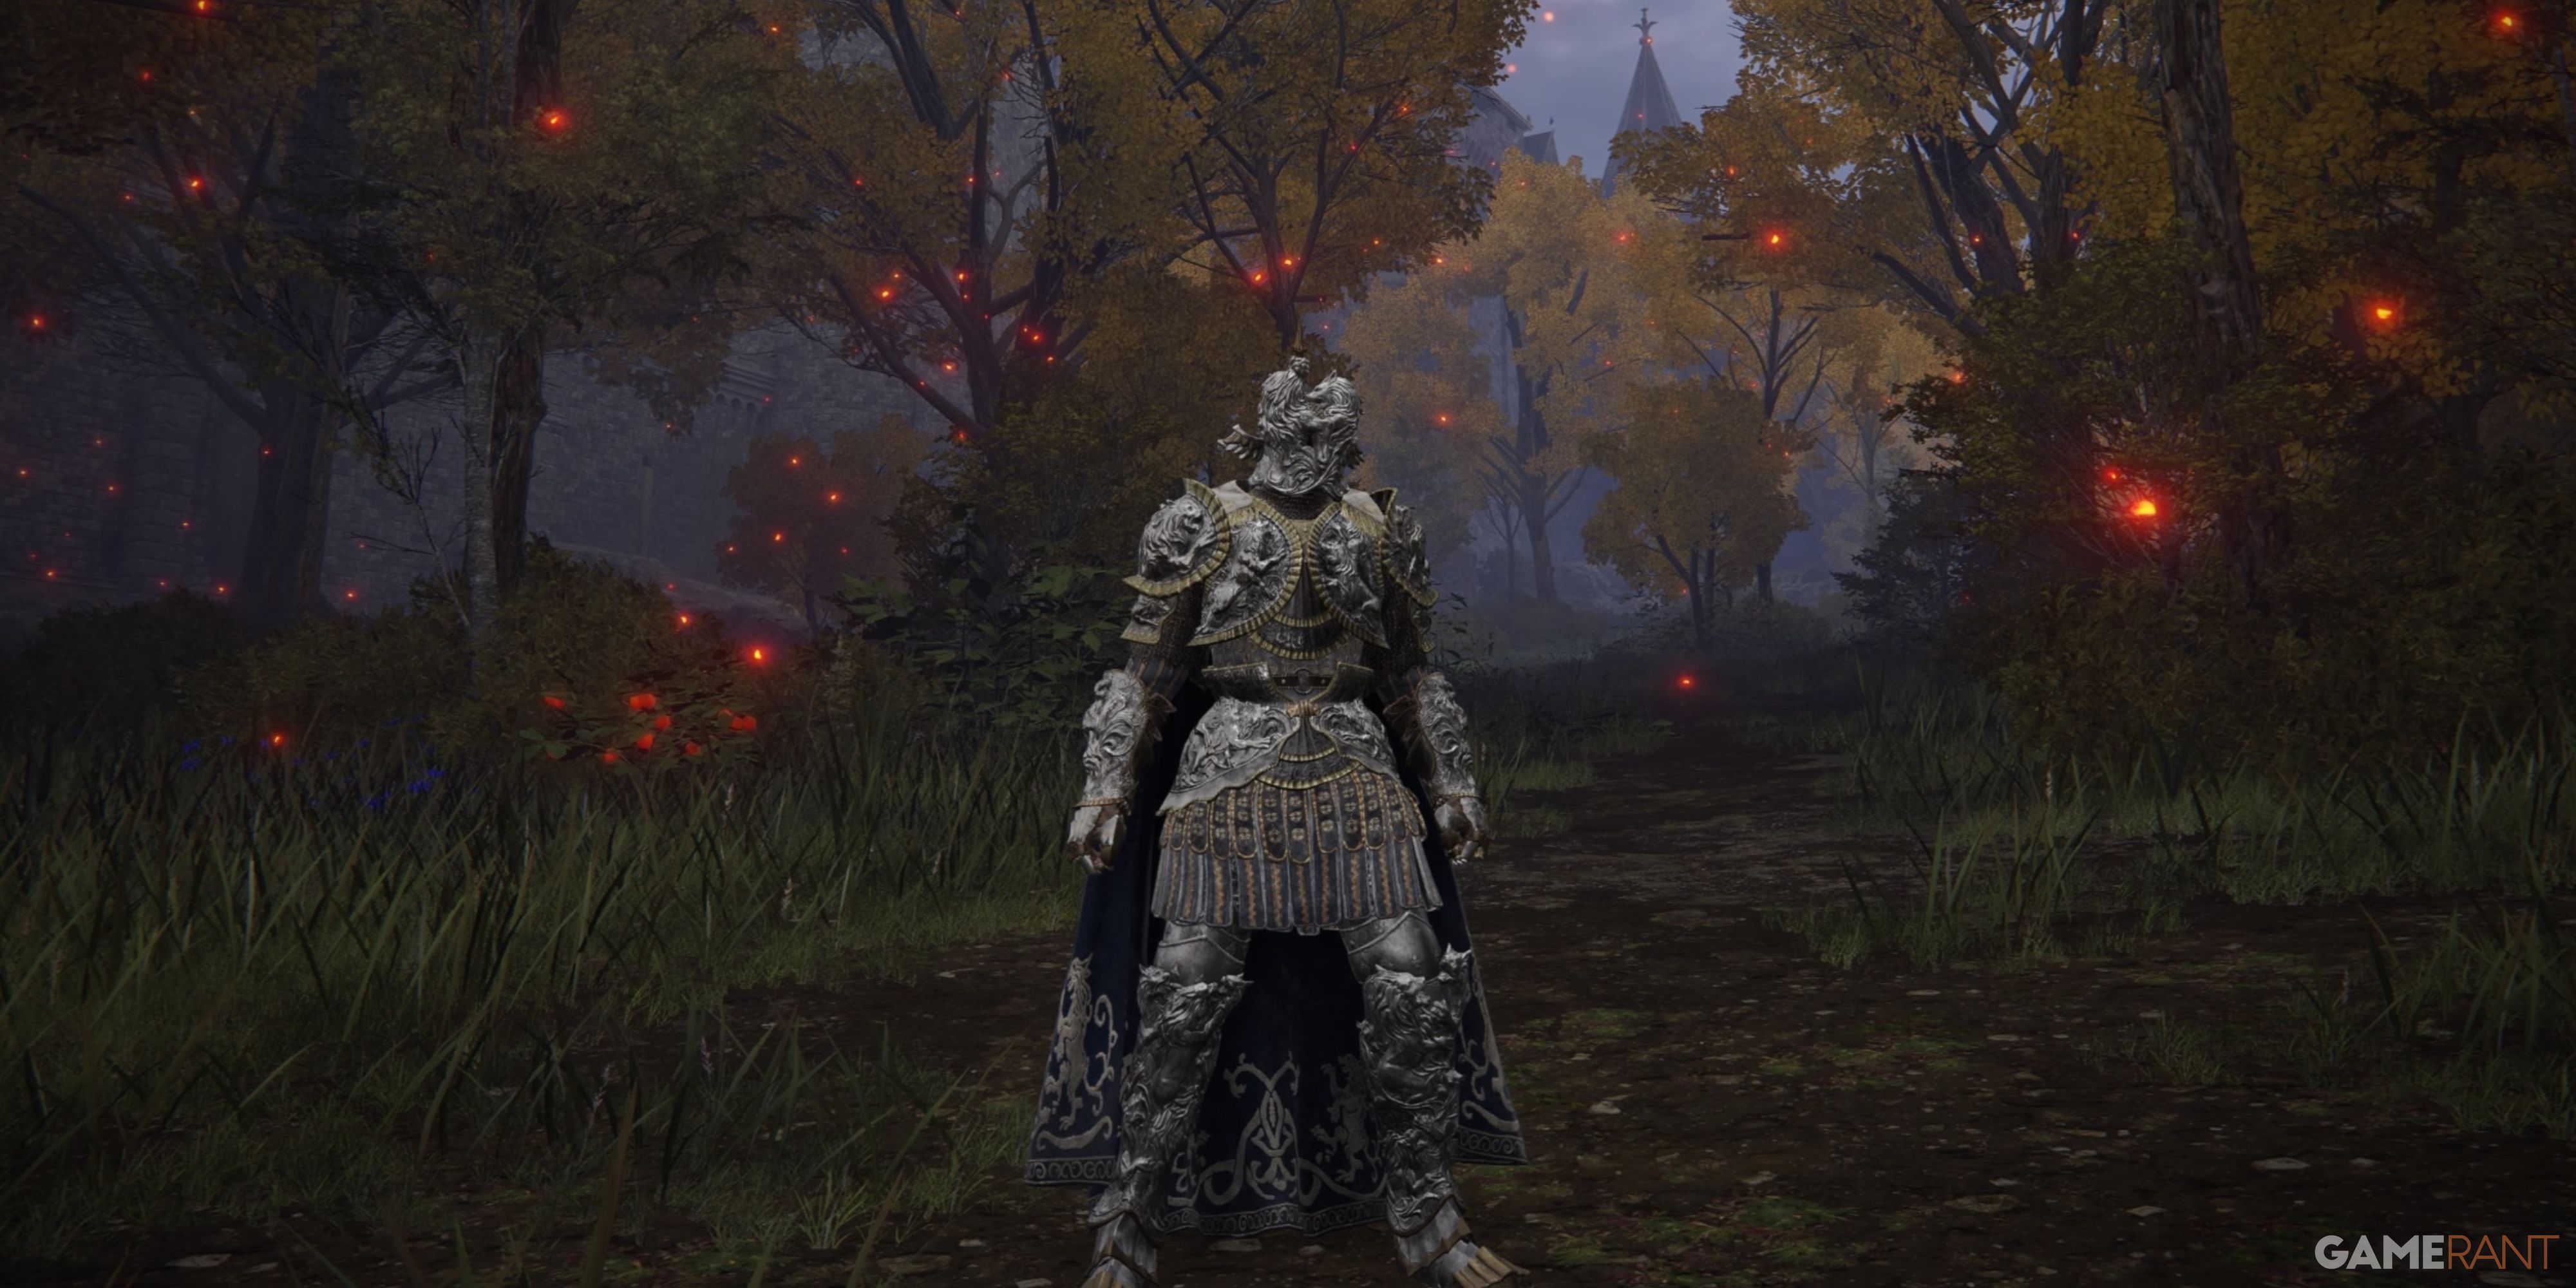 Elden Ring character standing in a forest with the beast champion armor